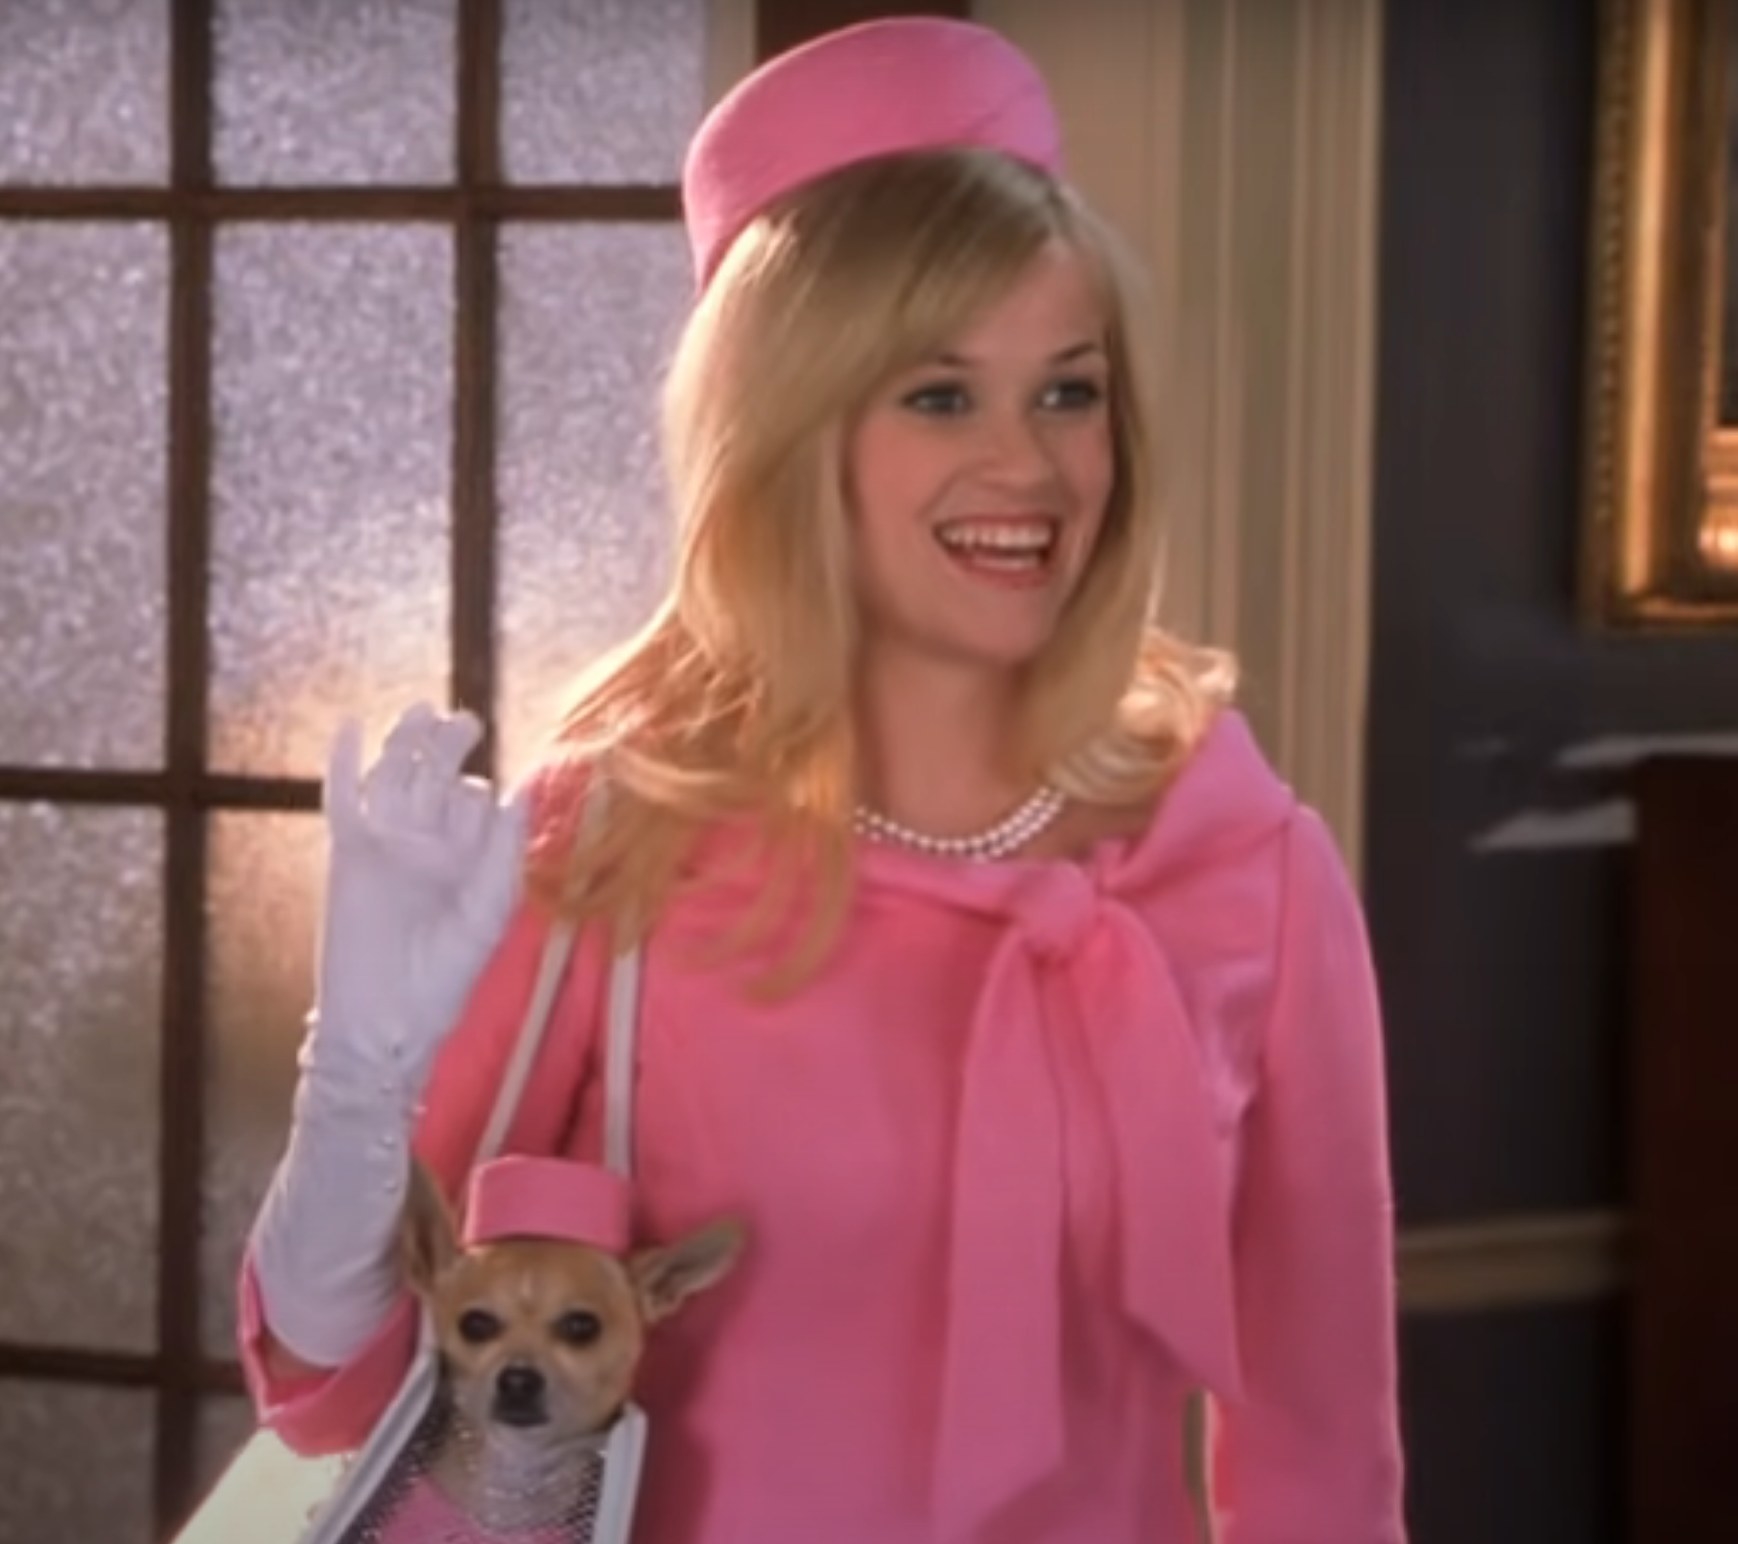 Reese Witherspoon as Elle Woods wears an all-pink outfit in the trailer for &quot;Legally Blonde 2: Red, White, &amp; Blonde&quot;